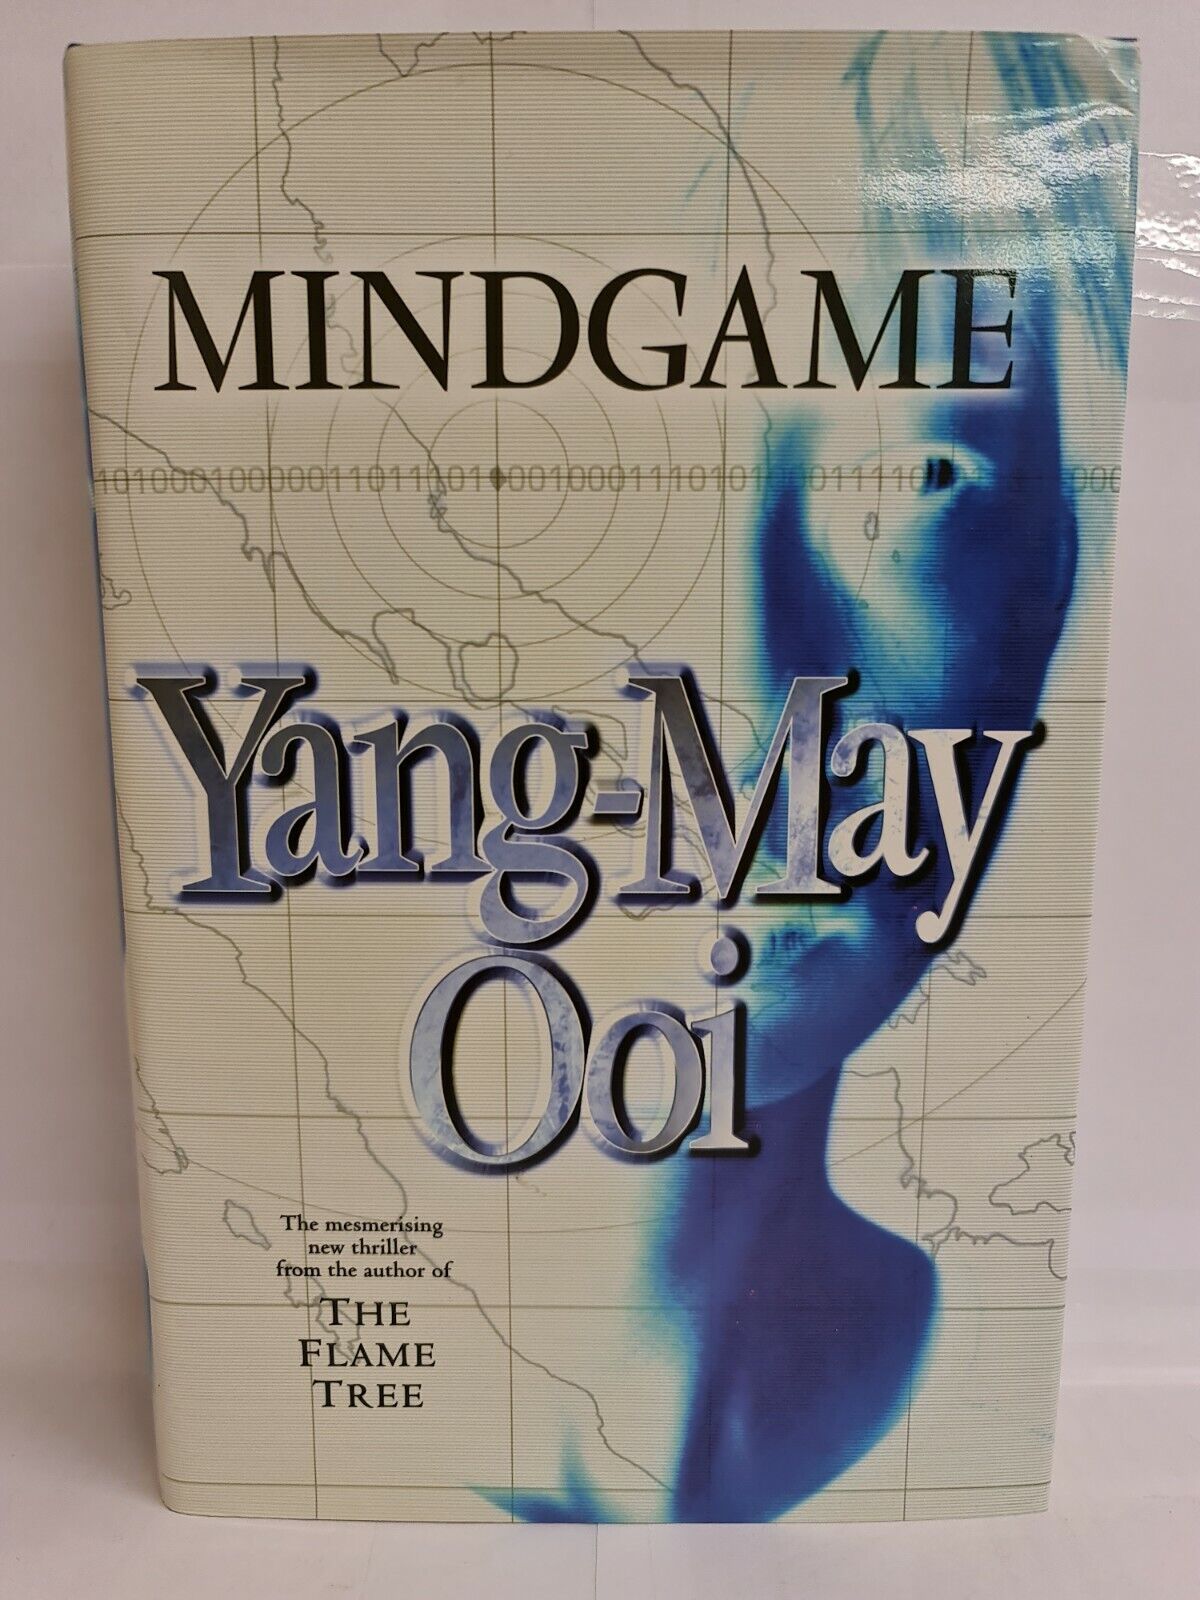 SIGNED - Mindgame by Yang-May Ooi (2000)